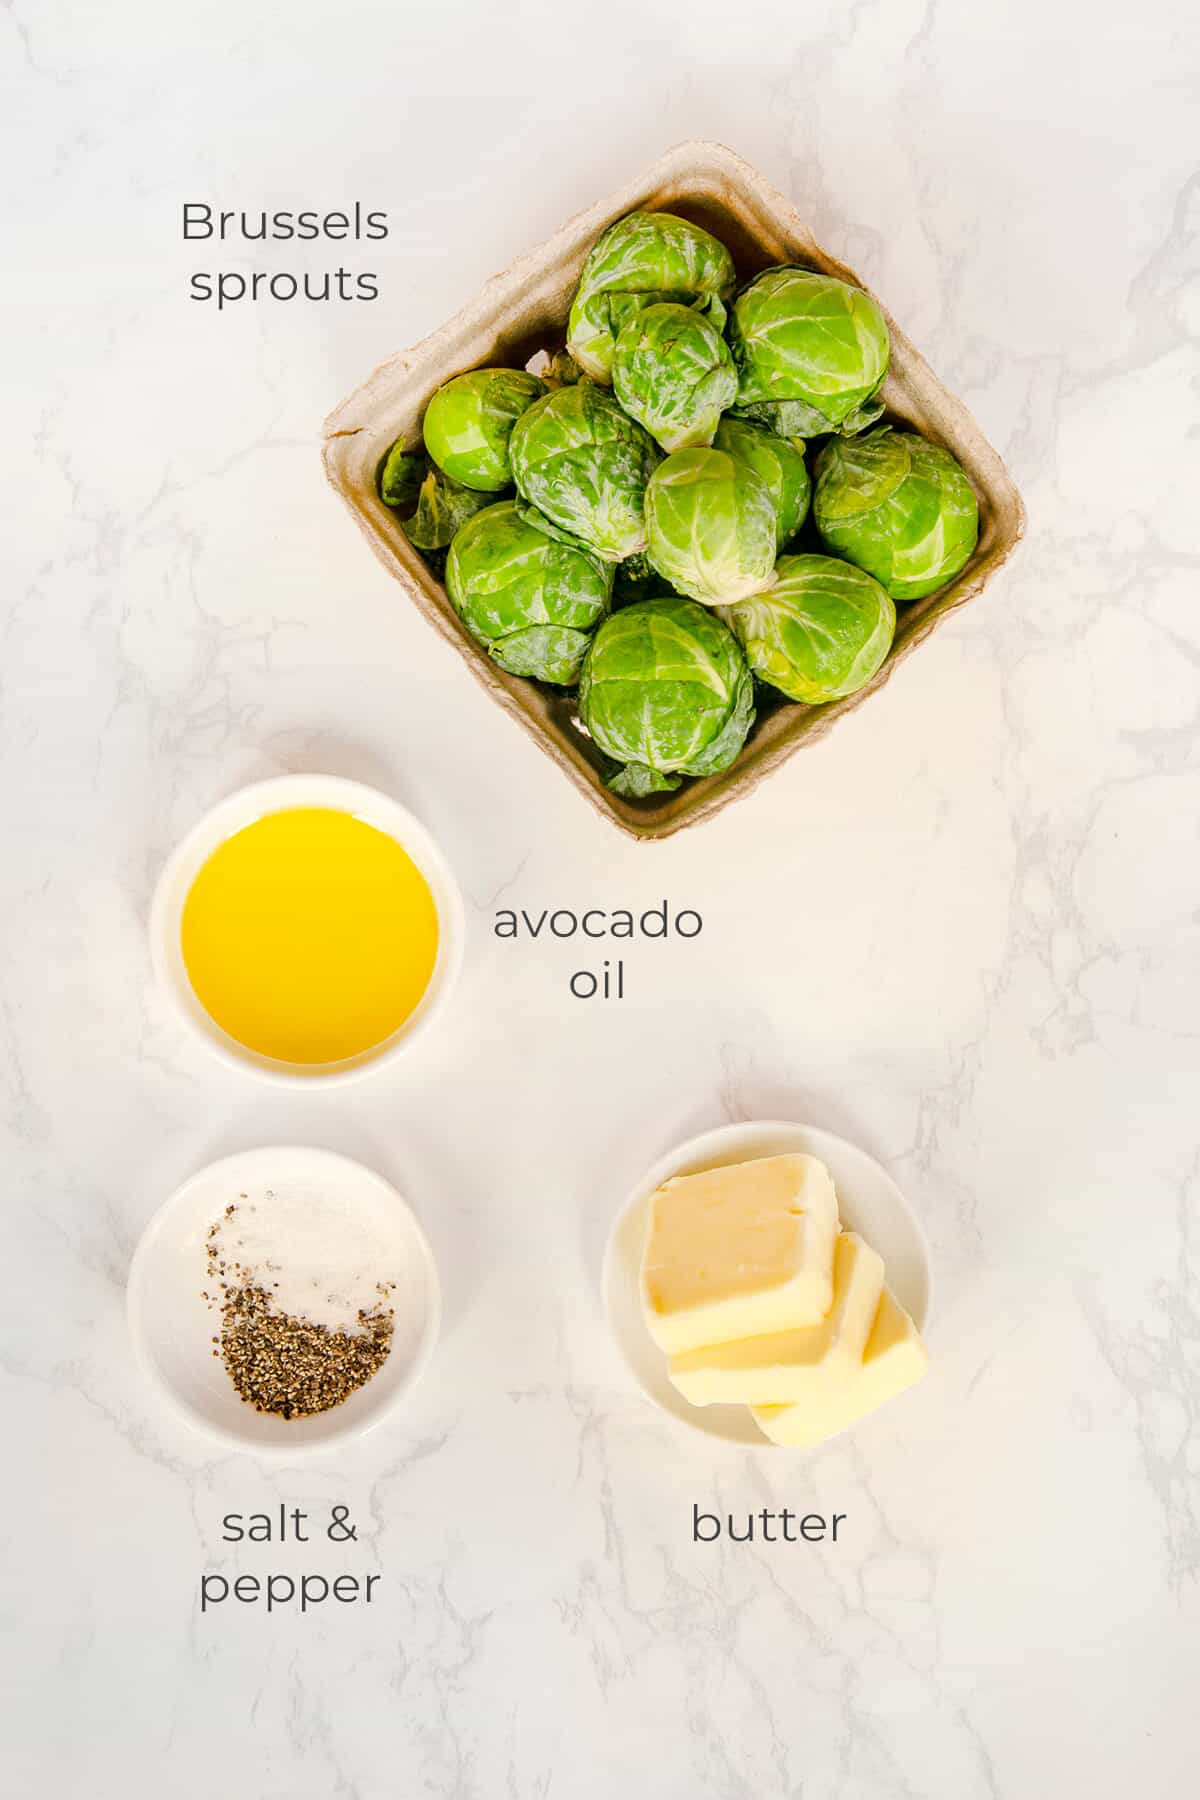 Top down image of ingredients labeled and needed to make caramelized Brussels sprouts